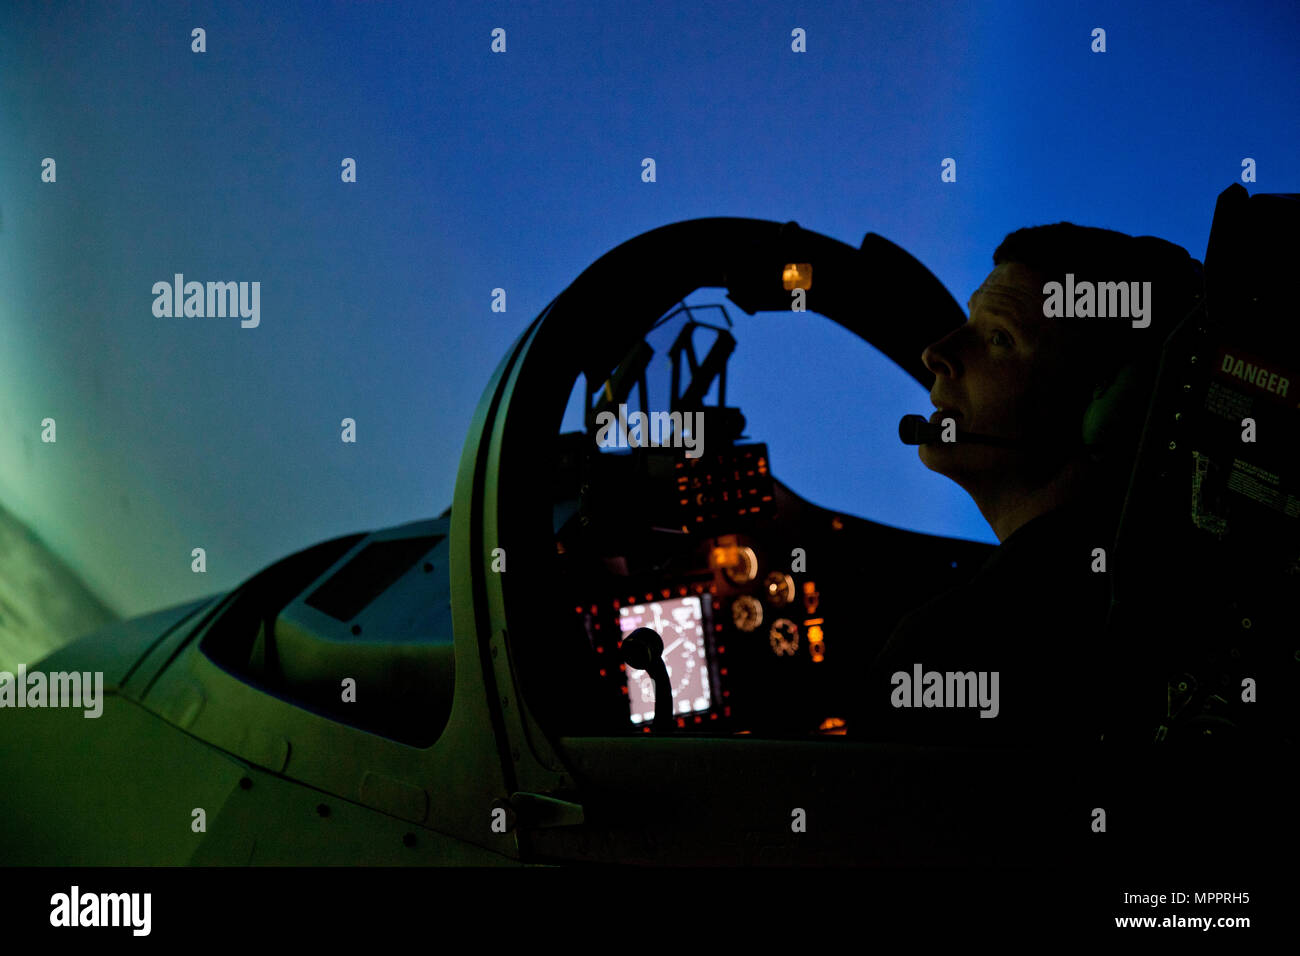 A U.S. Marine Corps officer assigned to the Undergraduate Level Pilot Training course, Training Air Wing Two, uses a T-45C training aircraft simulator at Naval Air Station Kingsville, Texas, March 21, 2017. The mission of Training Air Wing Two is to provide undergraduate level pilot training for Marines to prepare them for the Fleet Marine Force. (U.S. Marine Corps photo by Lance Cpl. Jose Villalobosrocha) Stock Photo